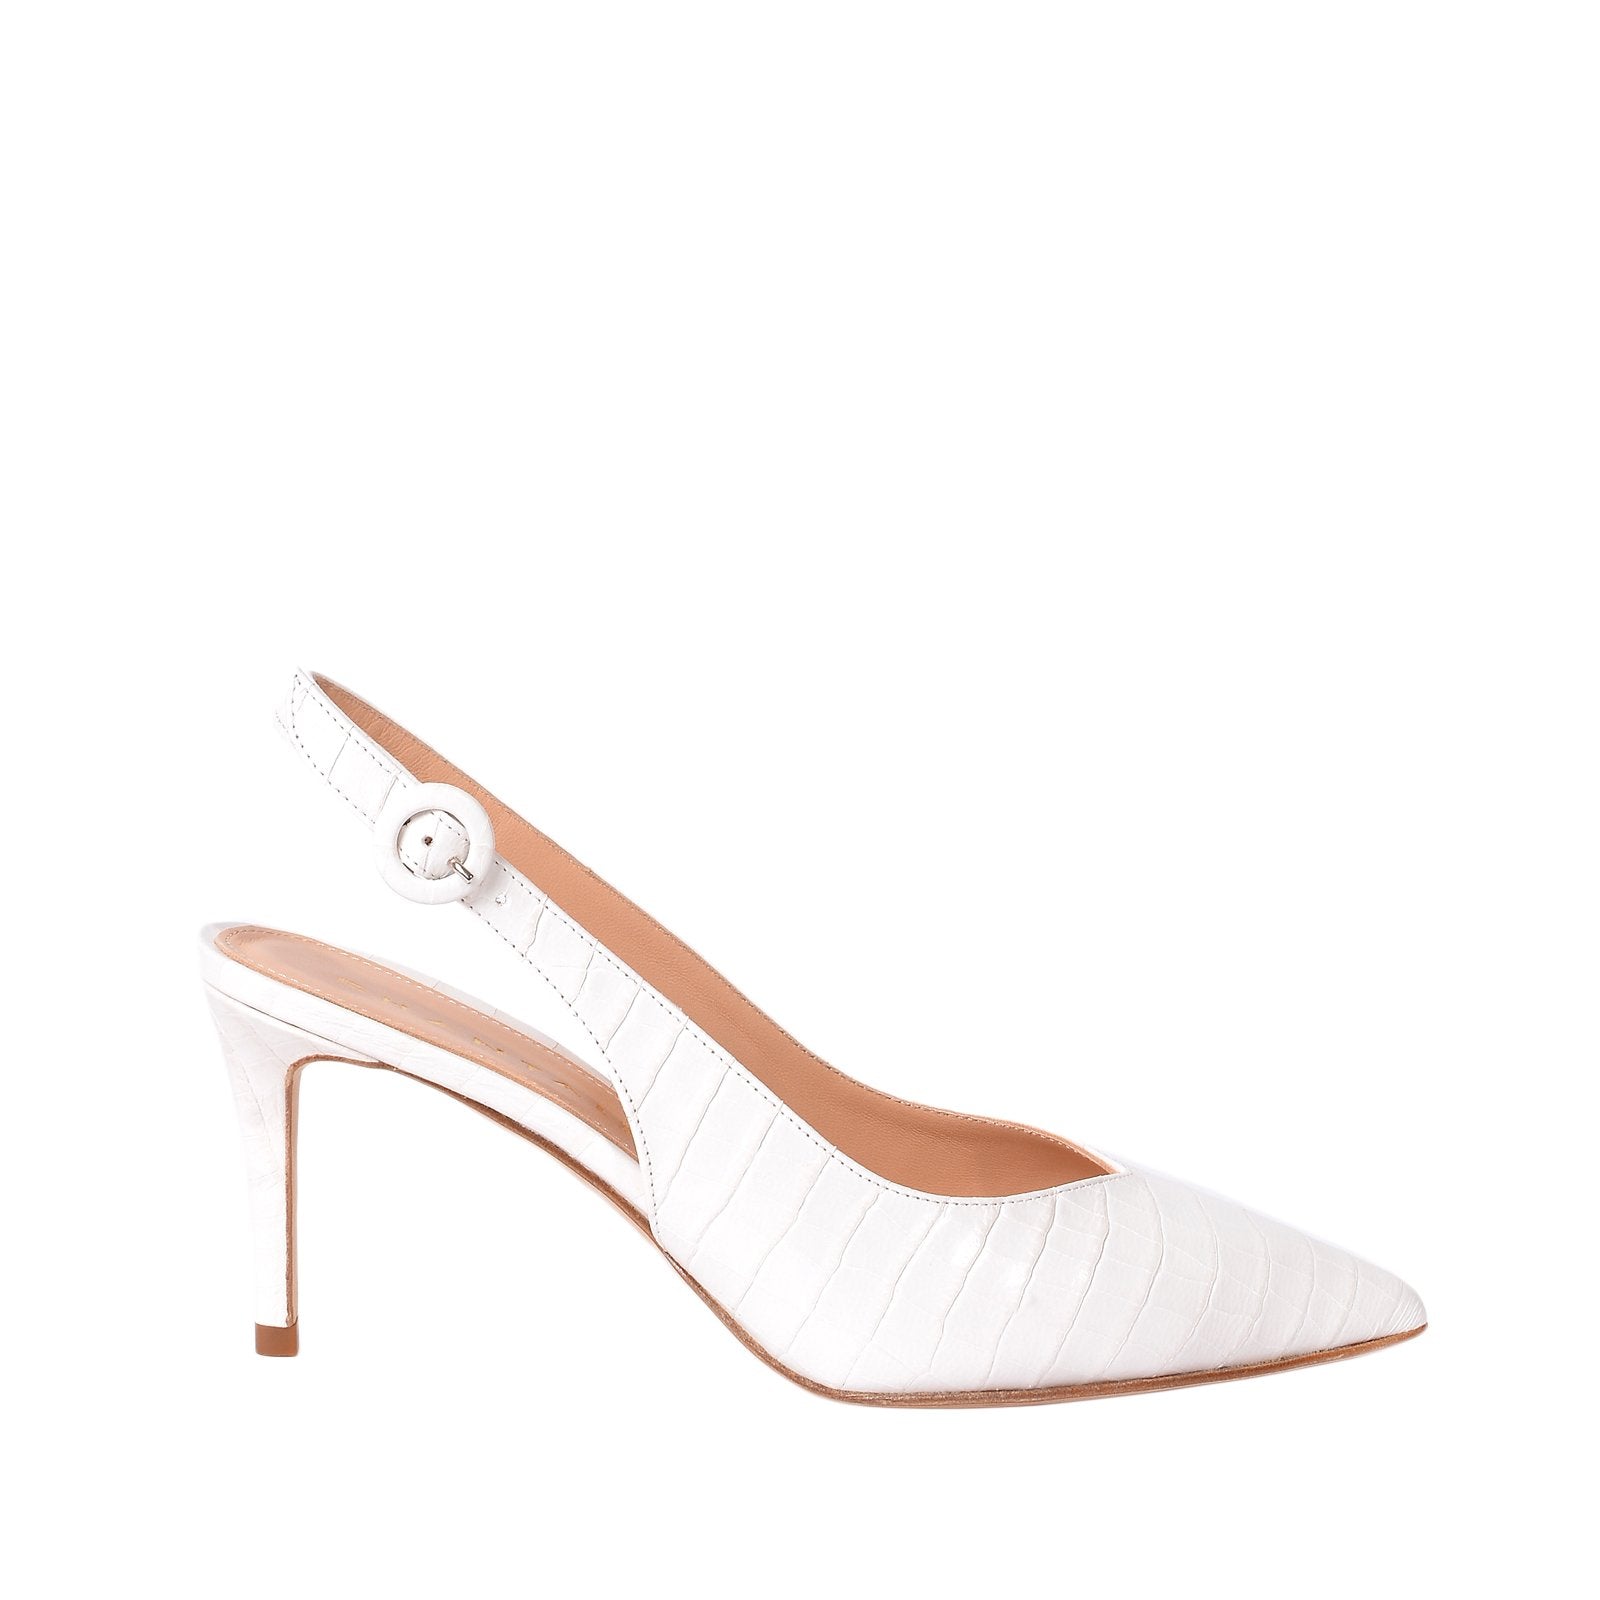 Cocco White Sling Back Pumps Heels 1039/White - 1